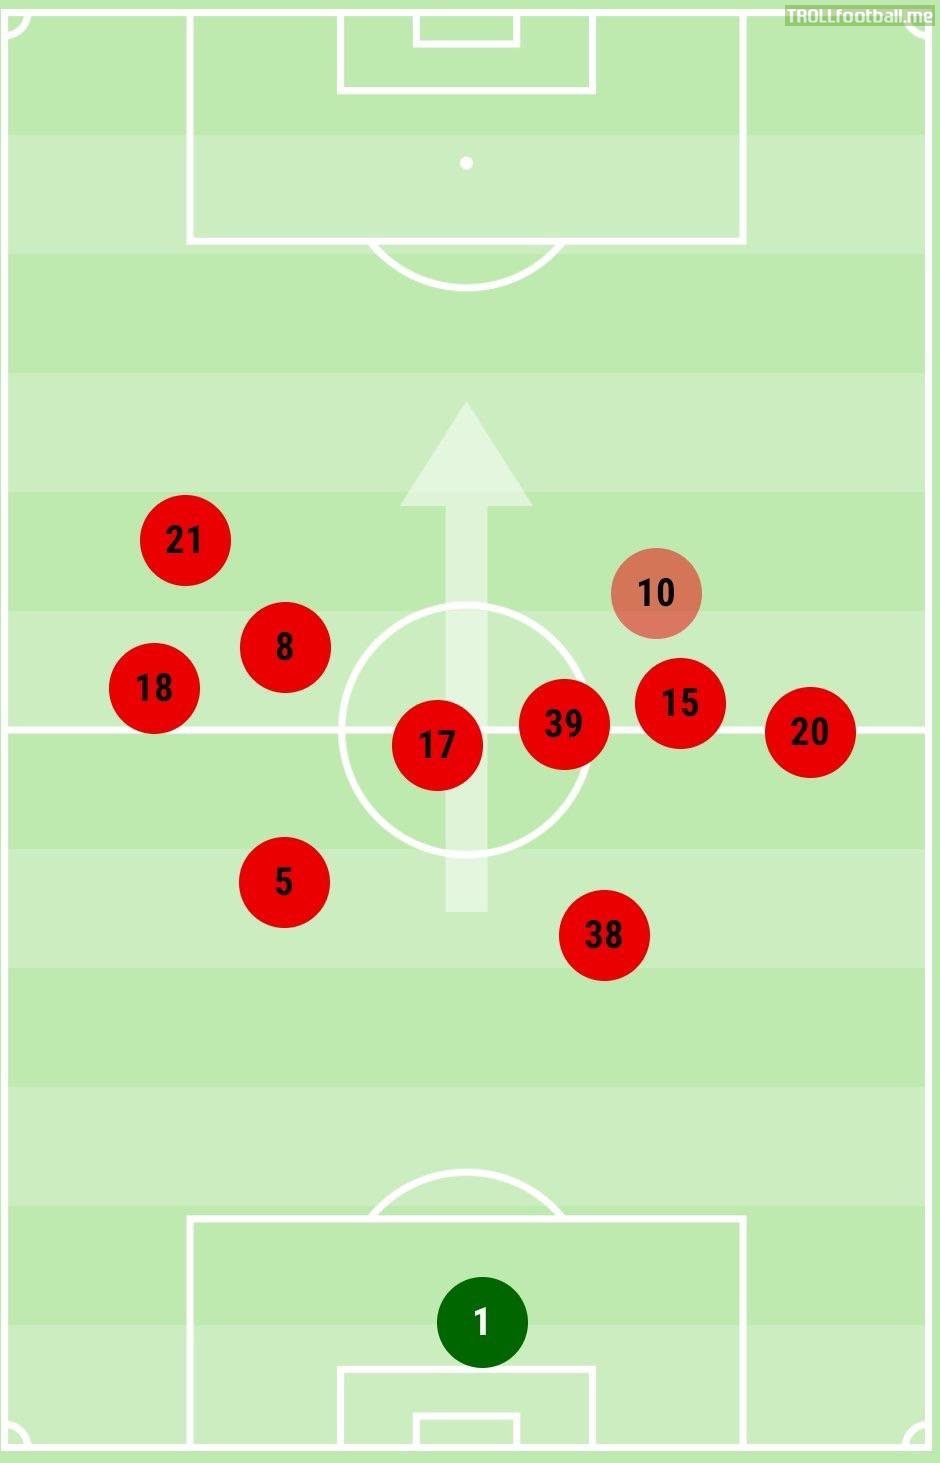 Average position of Man Utd players in the 1st half vs Newcastle